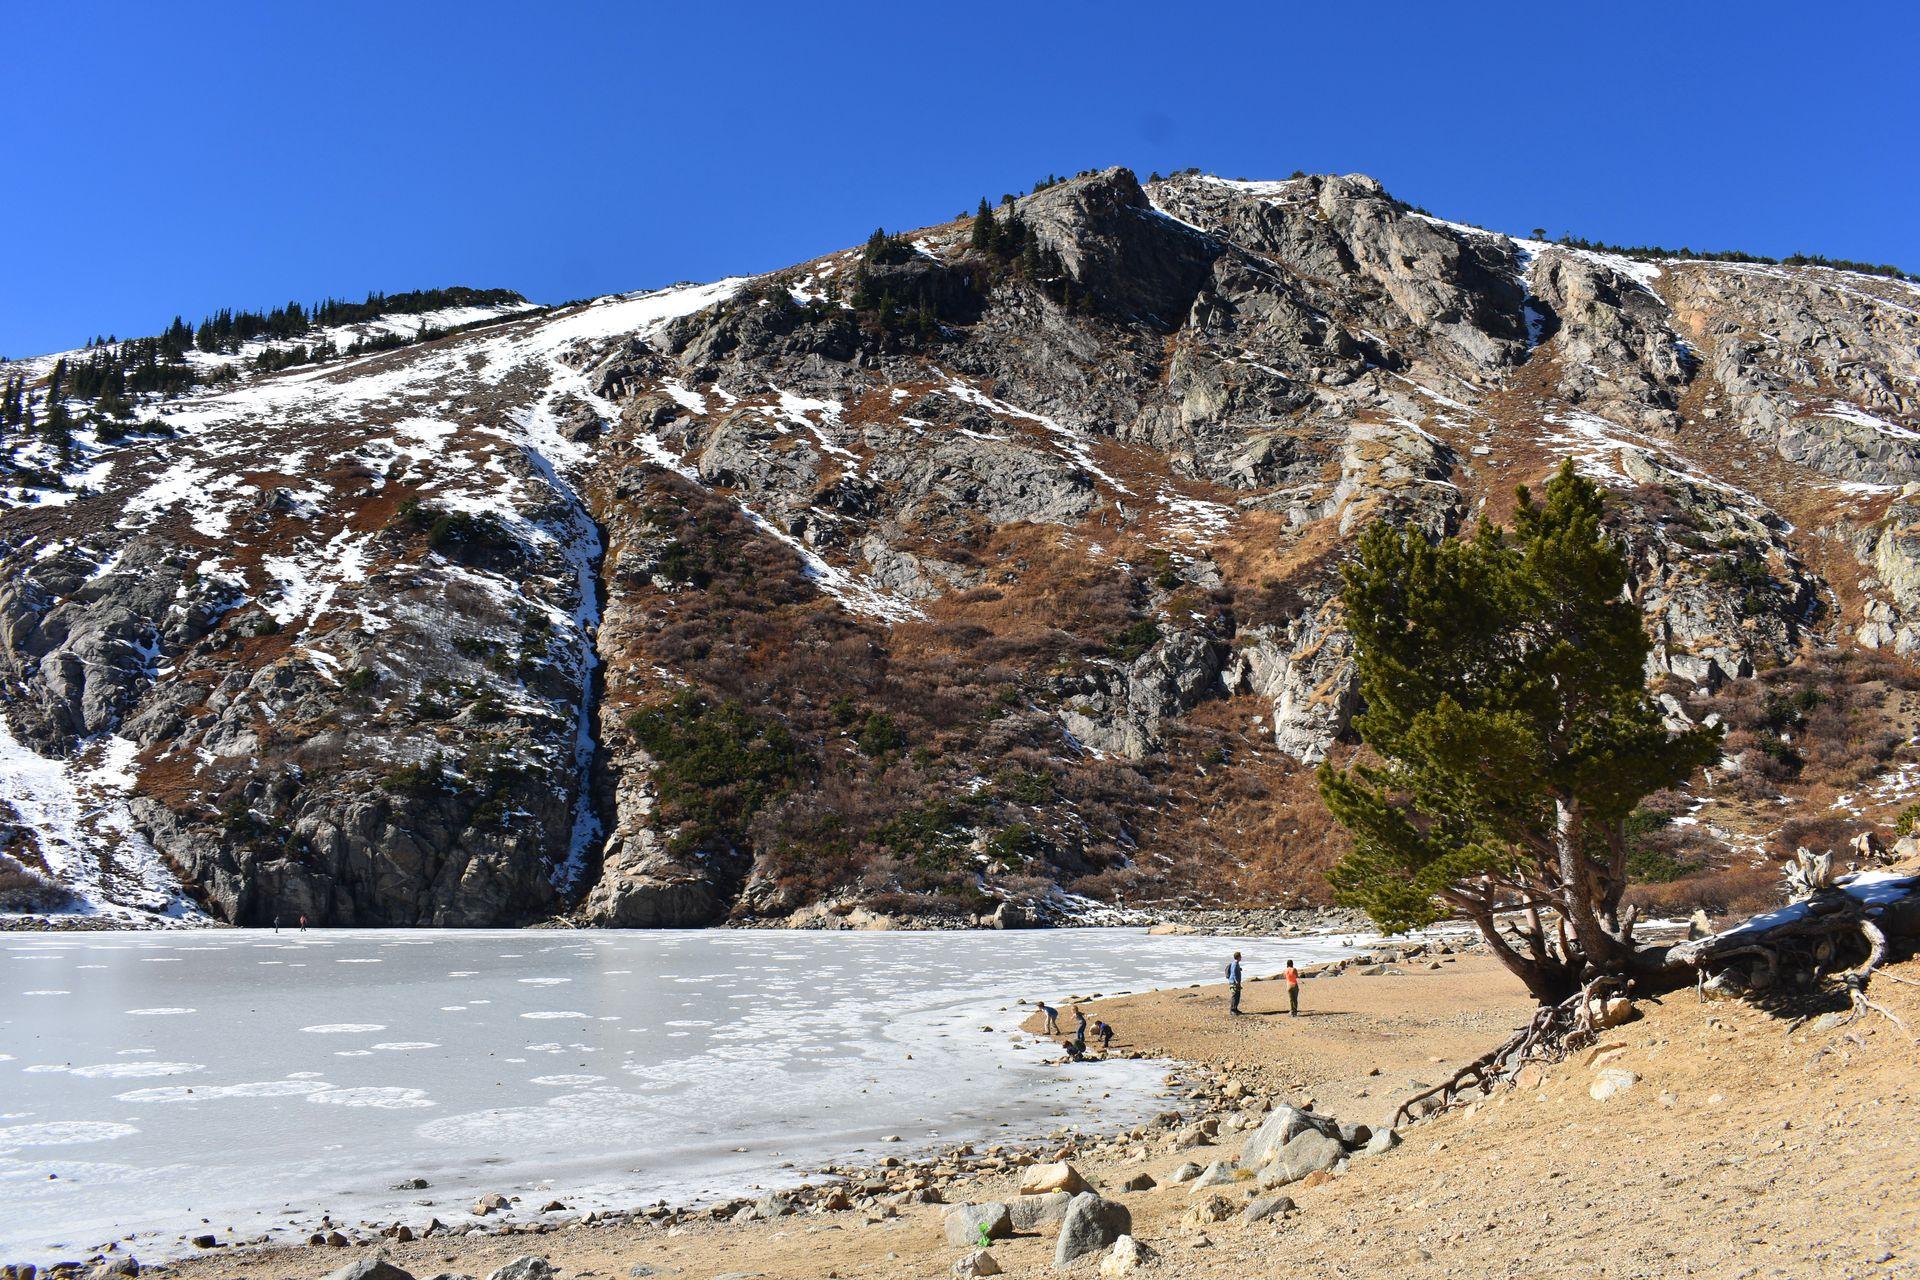 A view standing next to the frozen St. Mary's Lake. There is a mountain in the background and a tree next to the water.